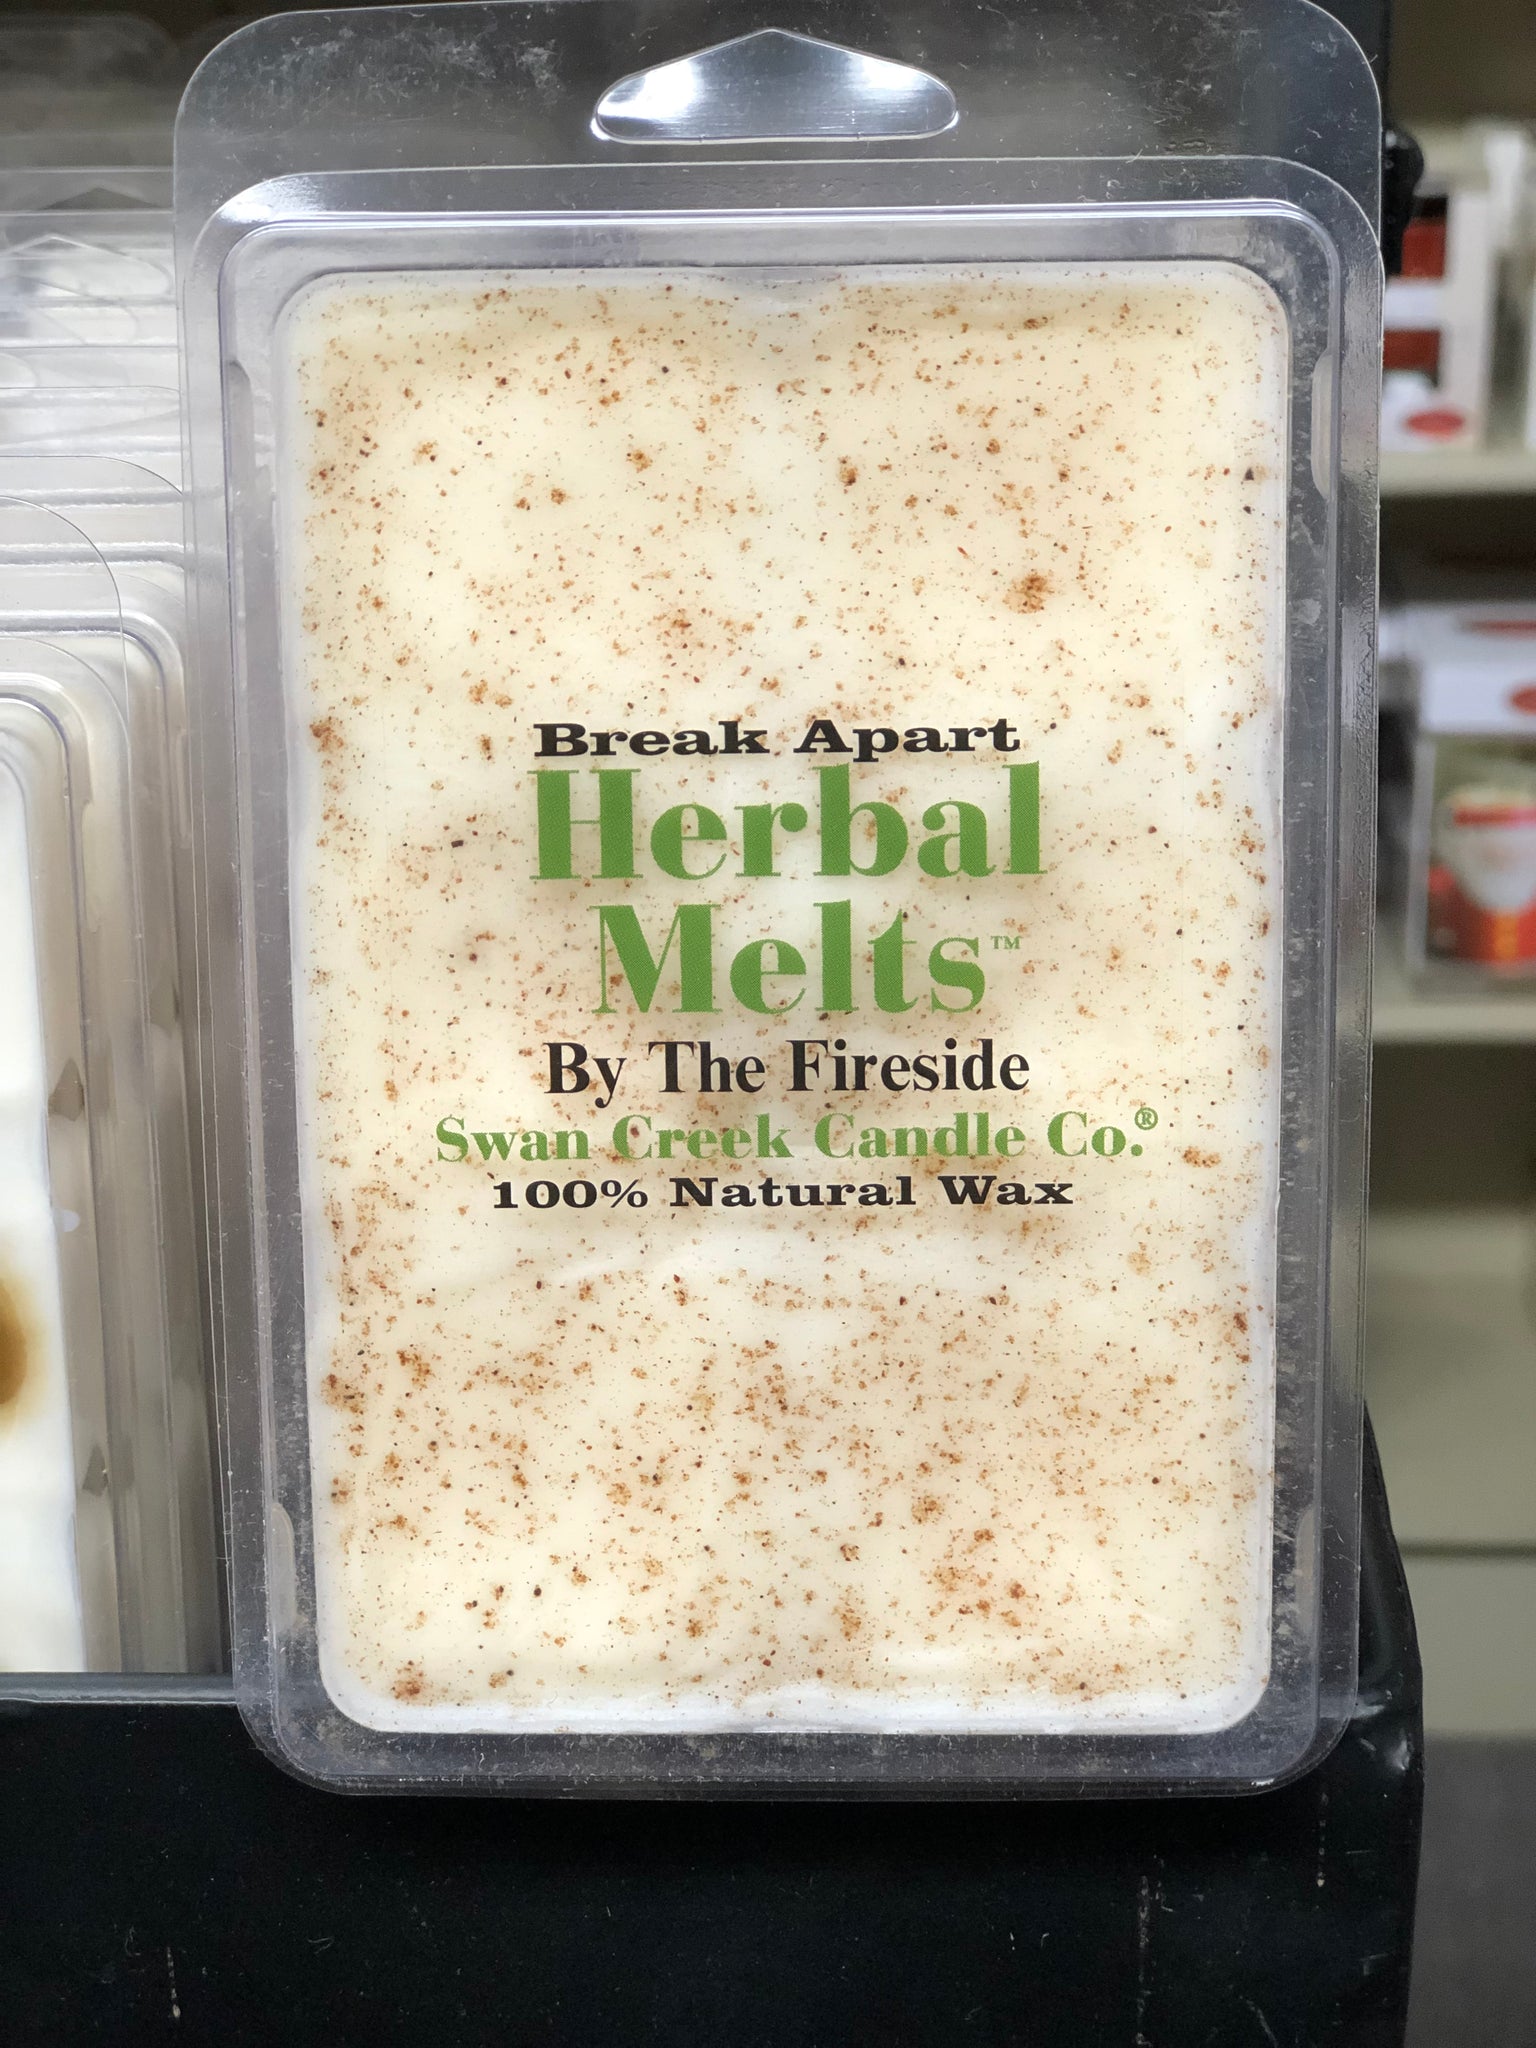 By the Fireside Herbal Melts